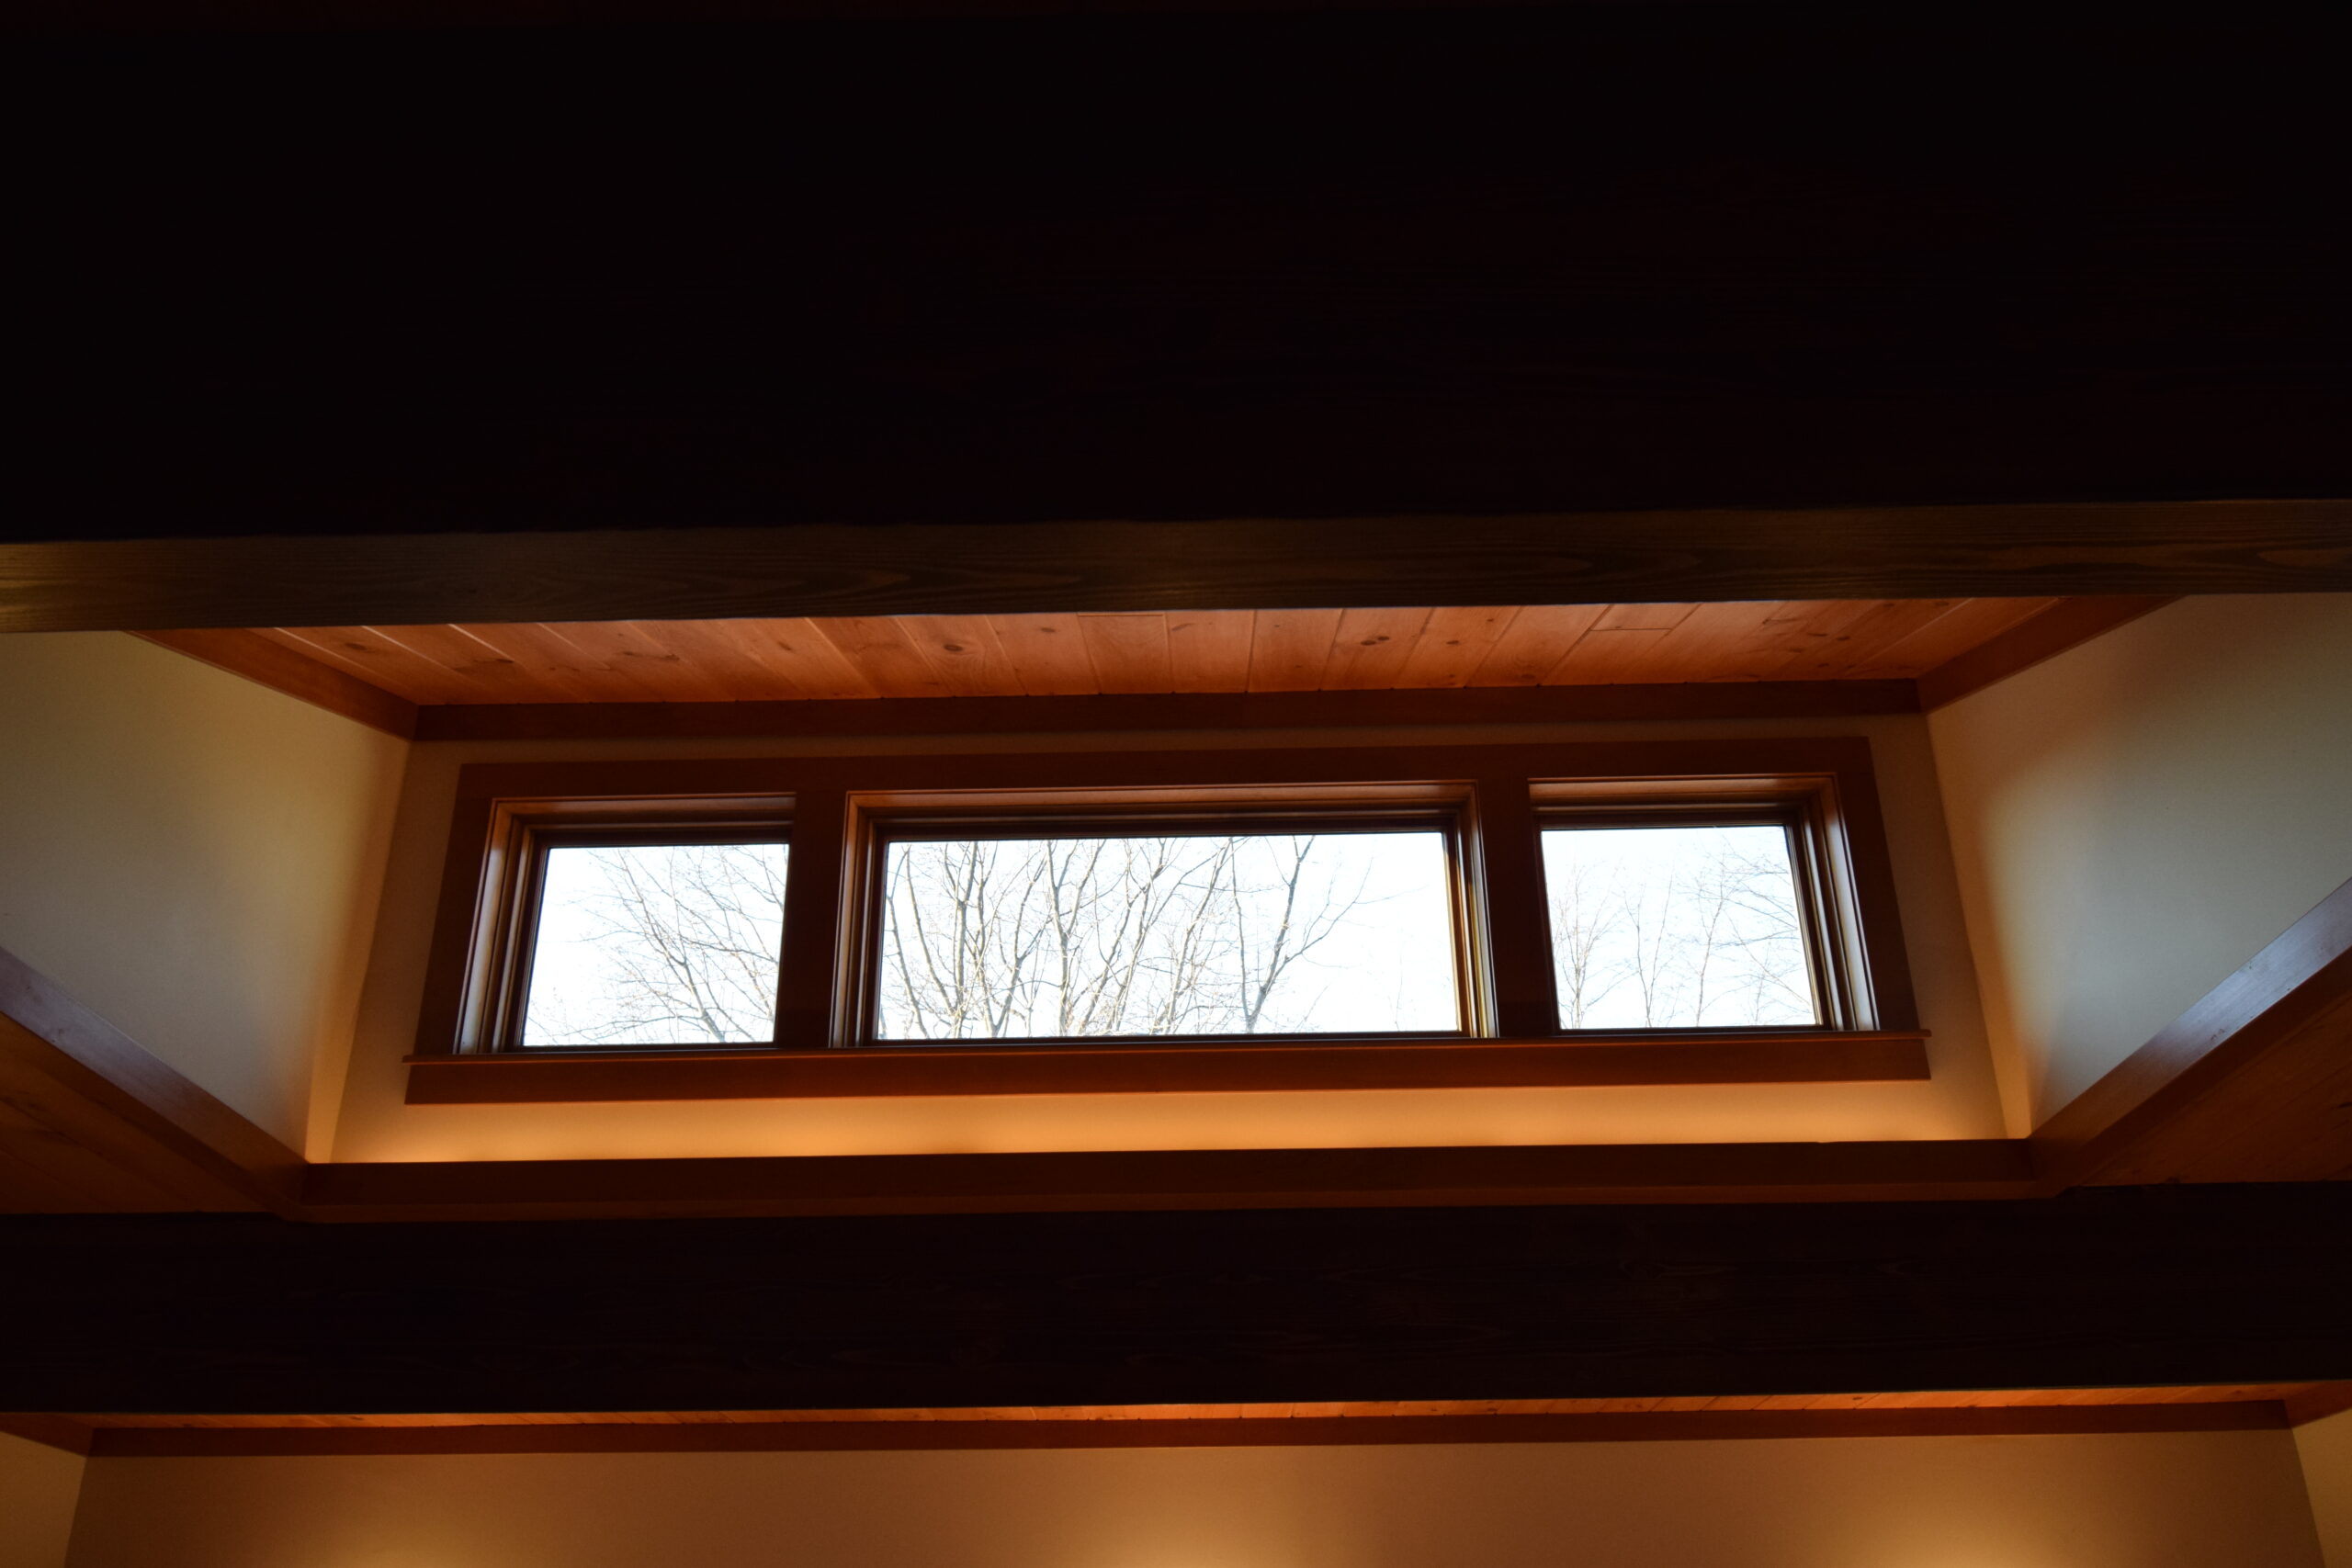 A photograph of a skylight next to a ceiling